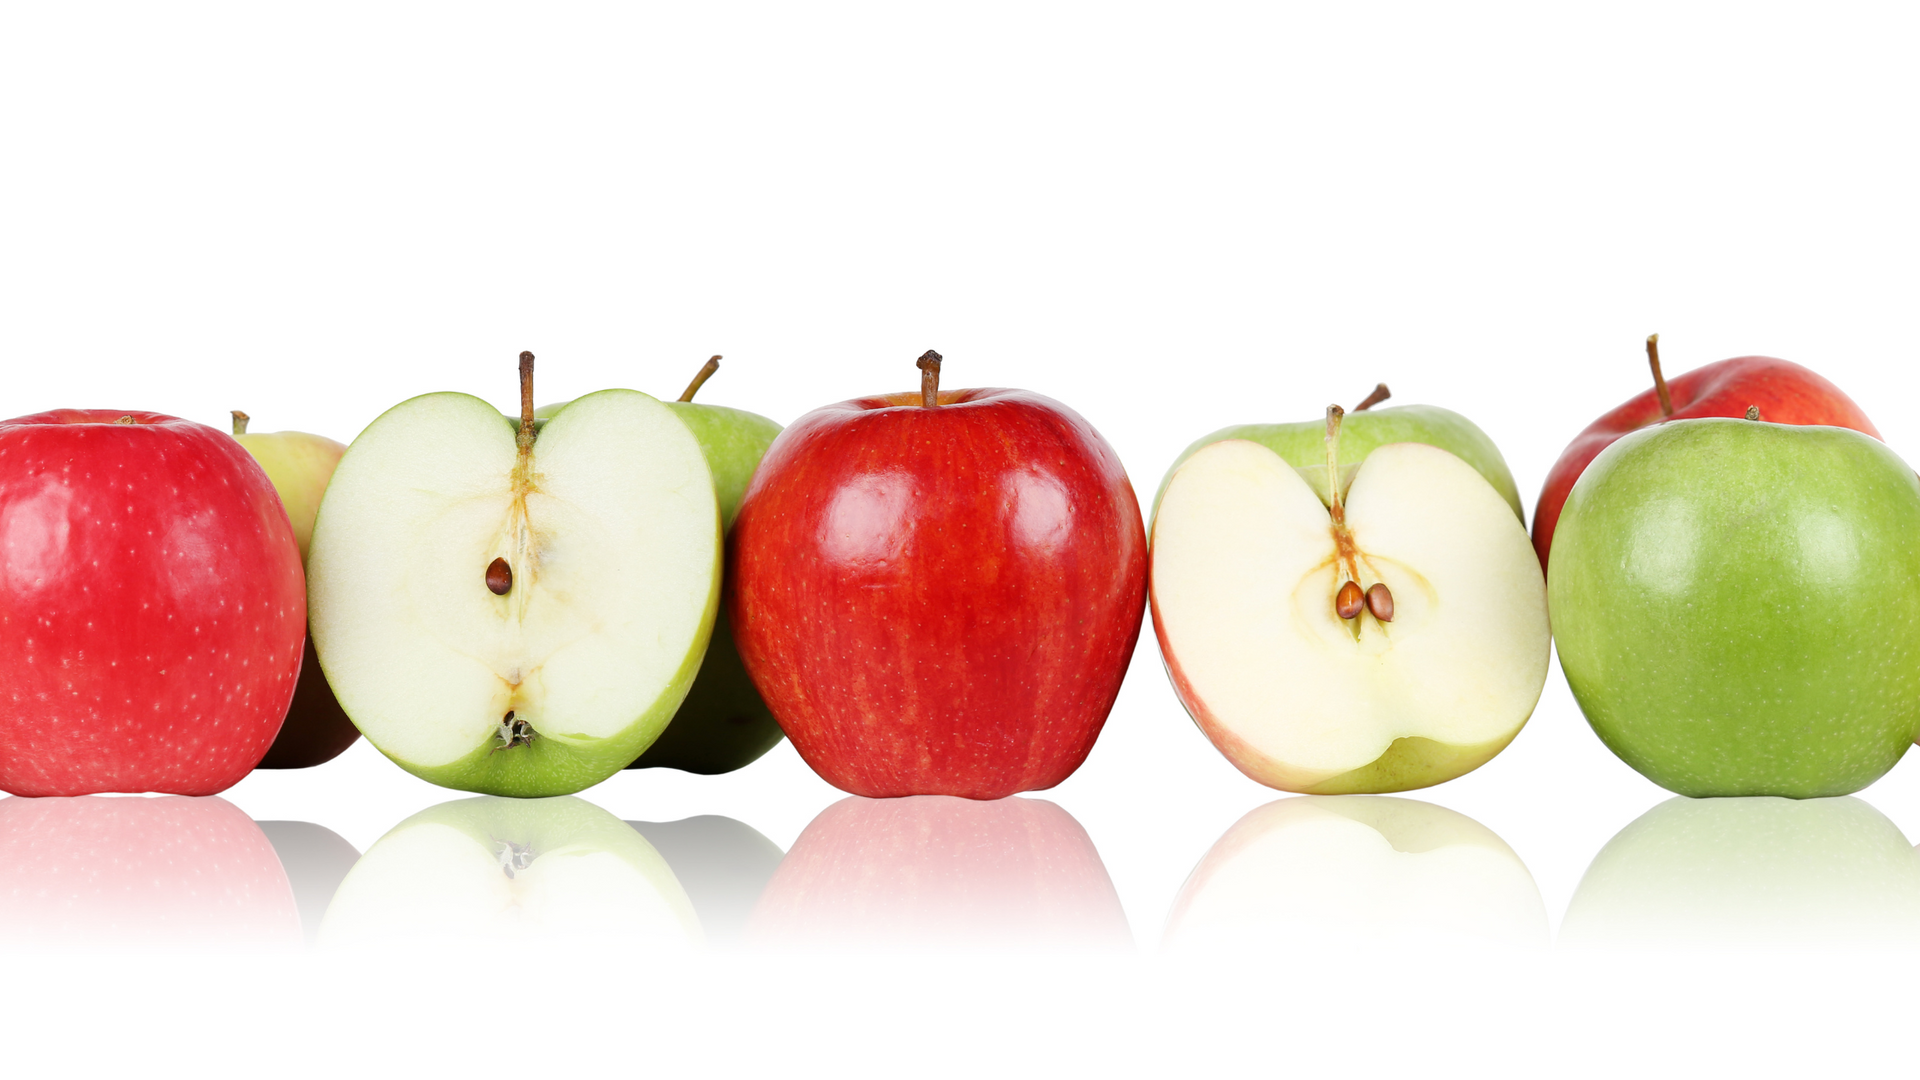 Cooked or Uncooked? Red or Green? What Ayurveda Tells Us About Apples.